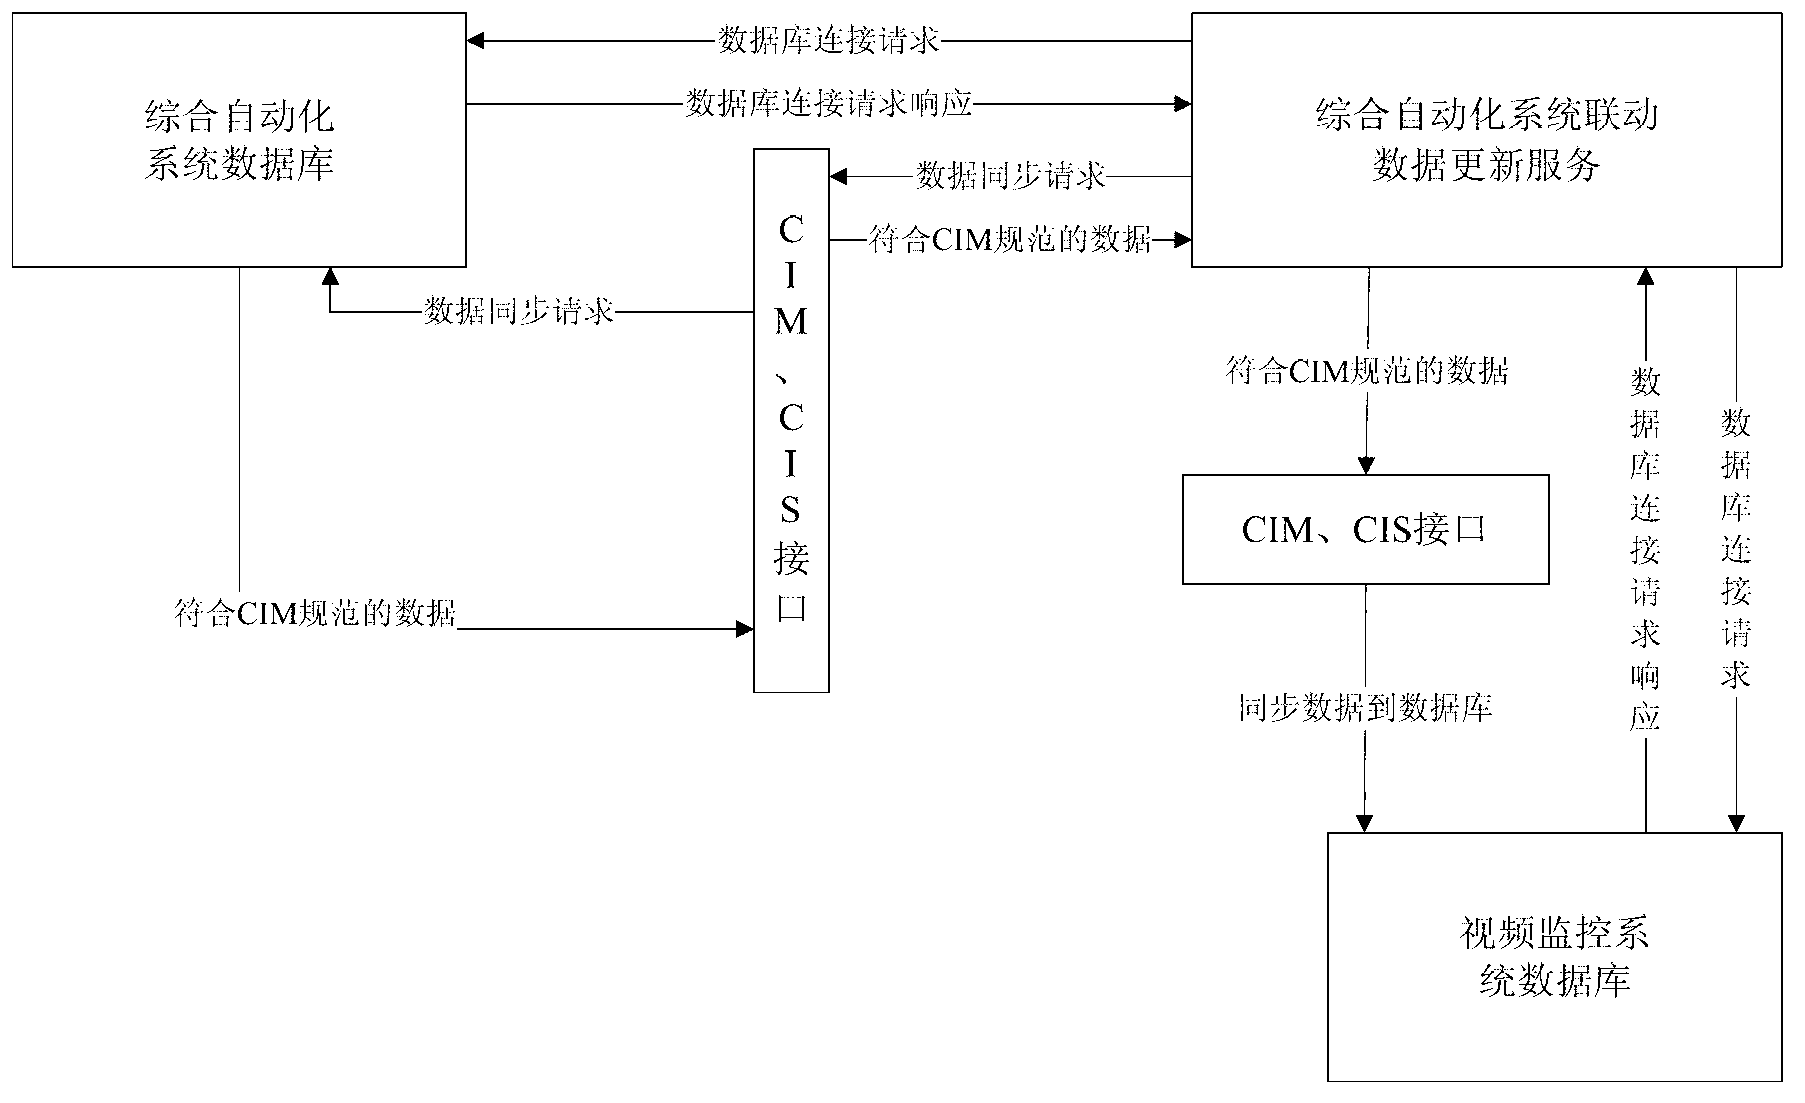 Remote vision linkage method for electric power master station and substation based on computer integrated manufacturing (CIM) data model